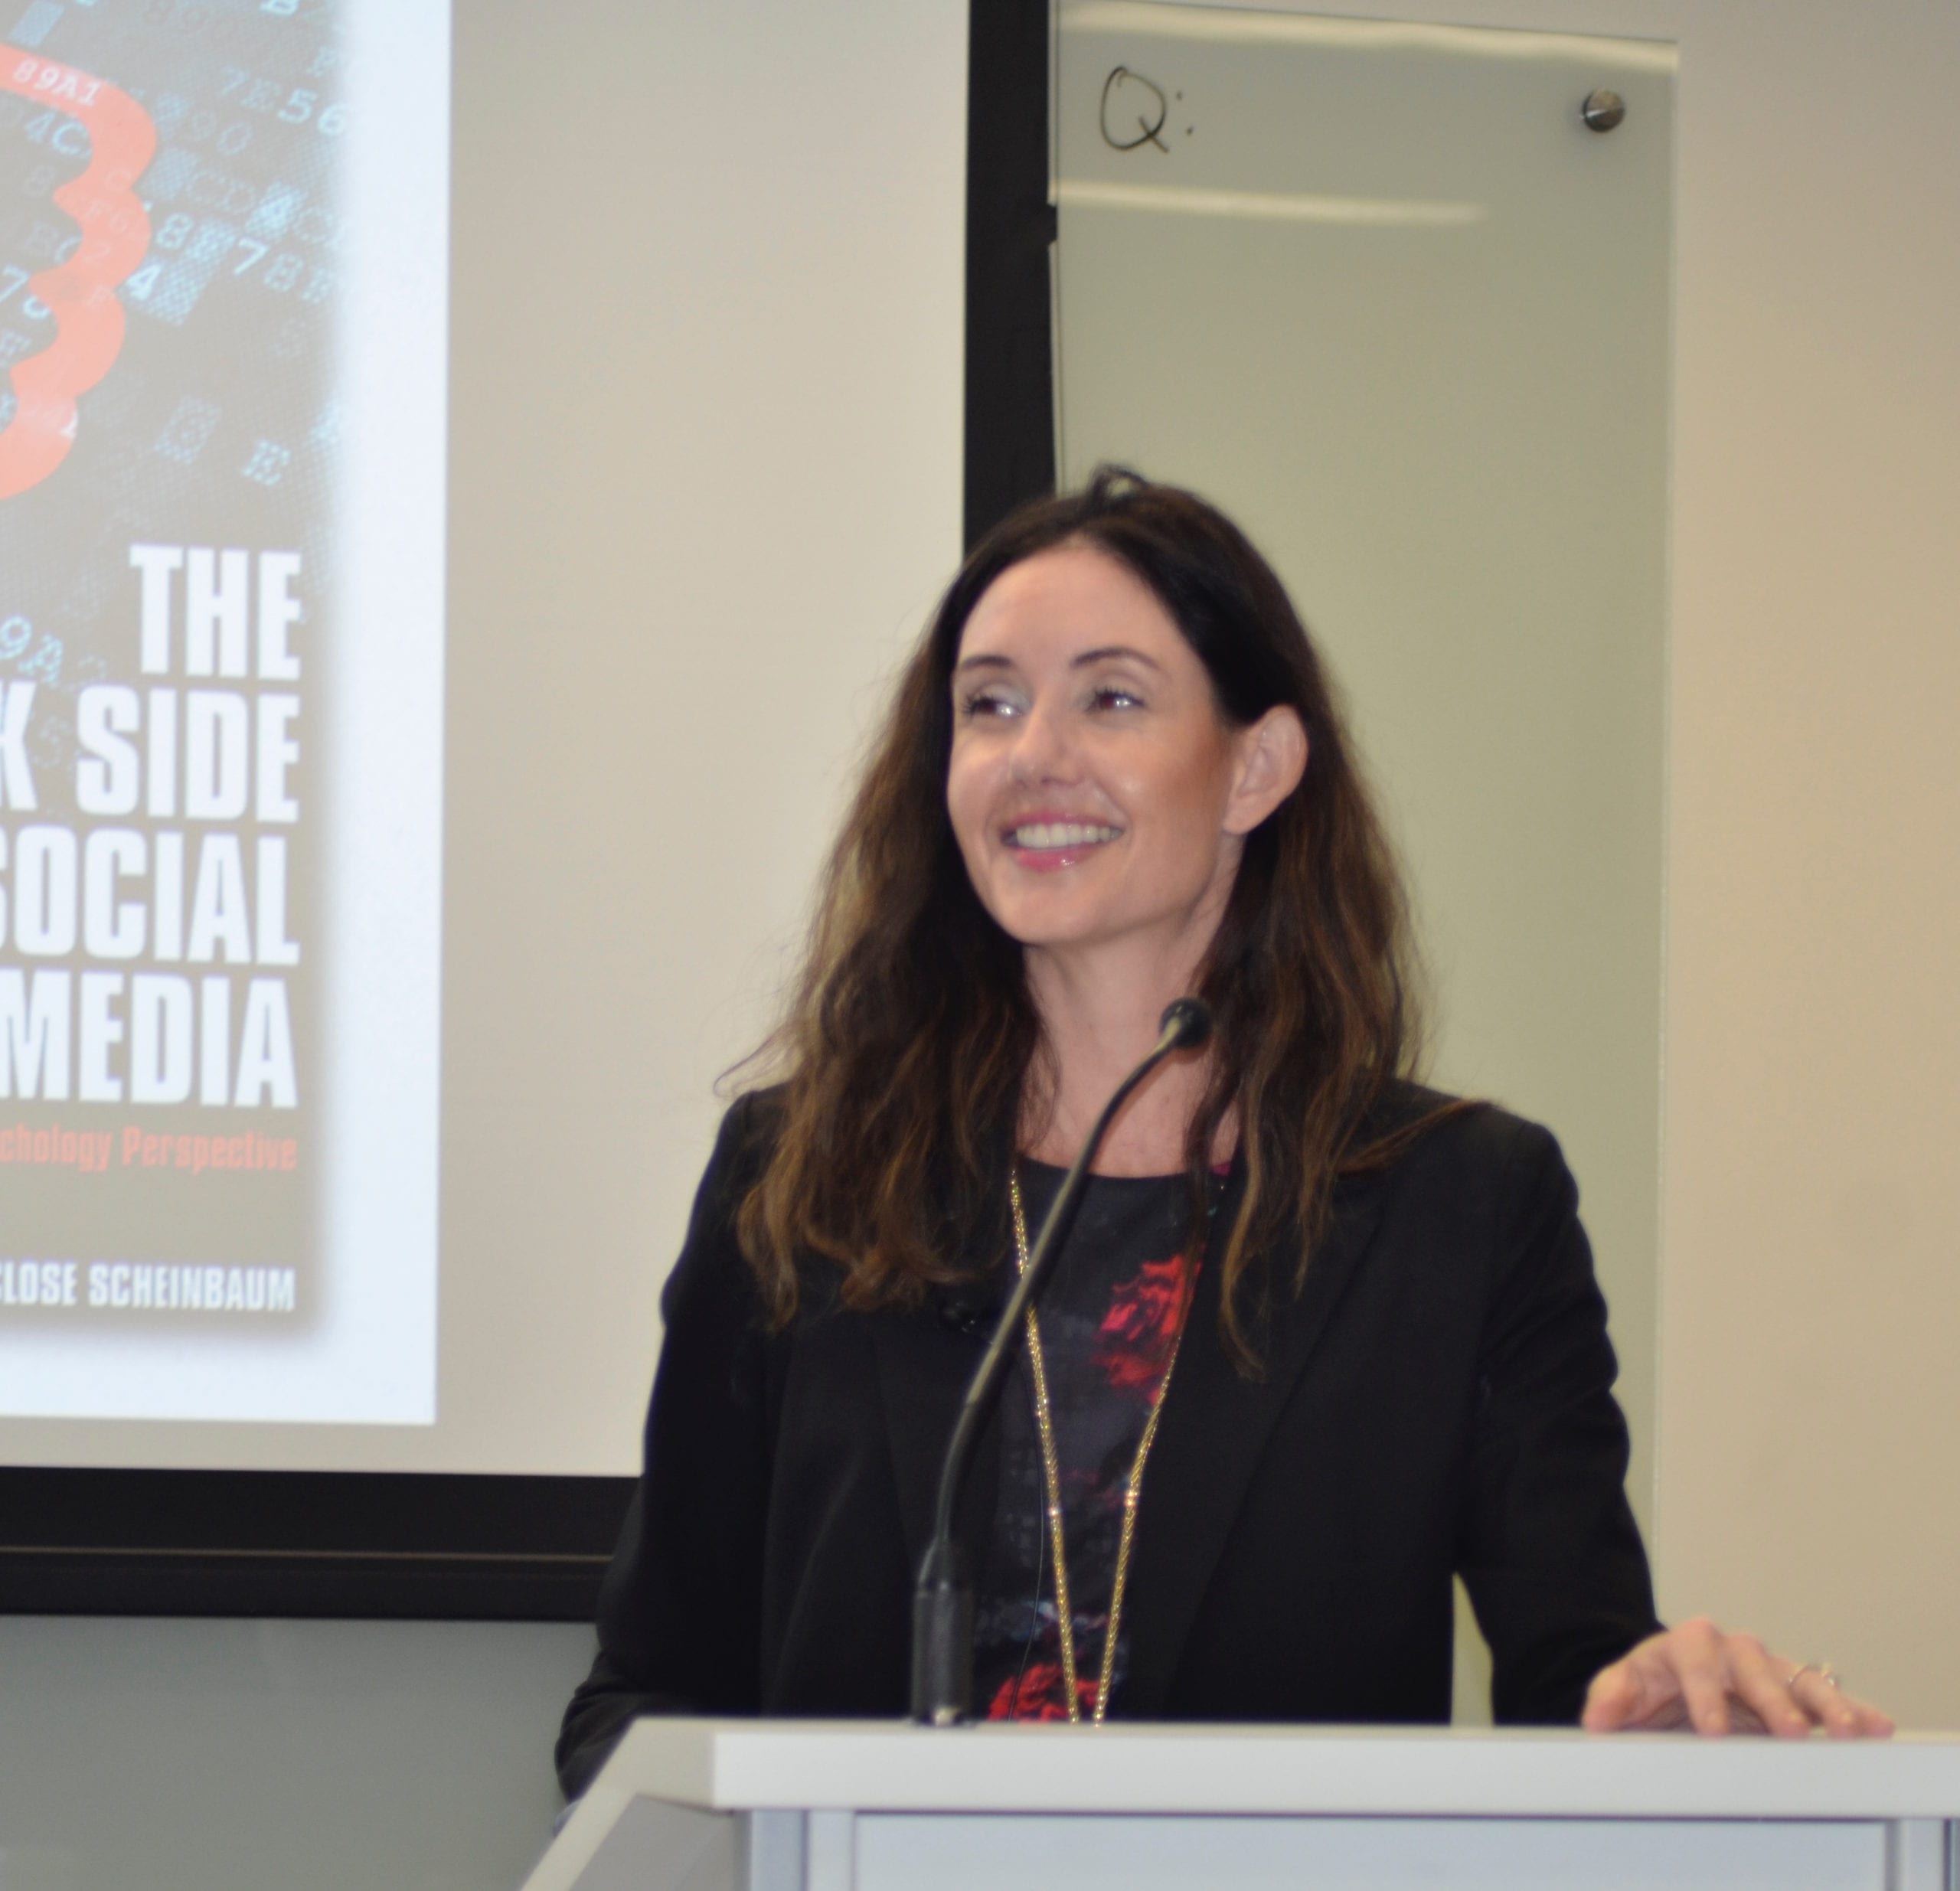 Angeline Close, professor at the University of Texas at Austin, explains how the use of social media has several unintended consequences (photo Angela Whiteley).